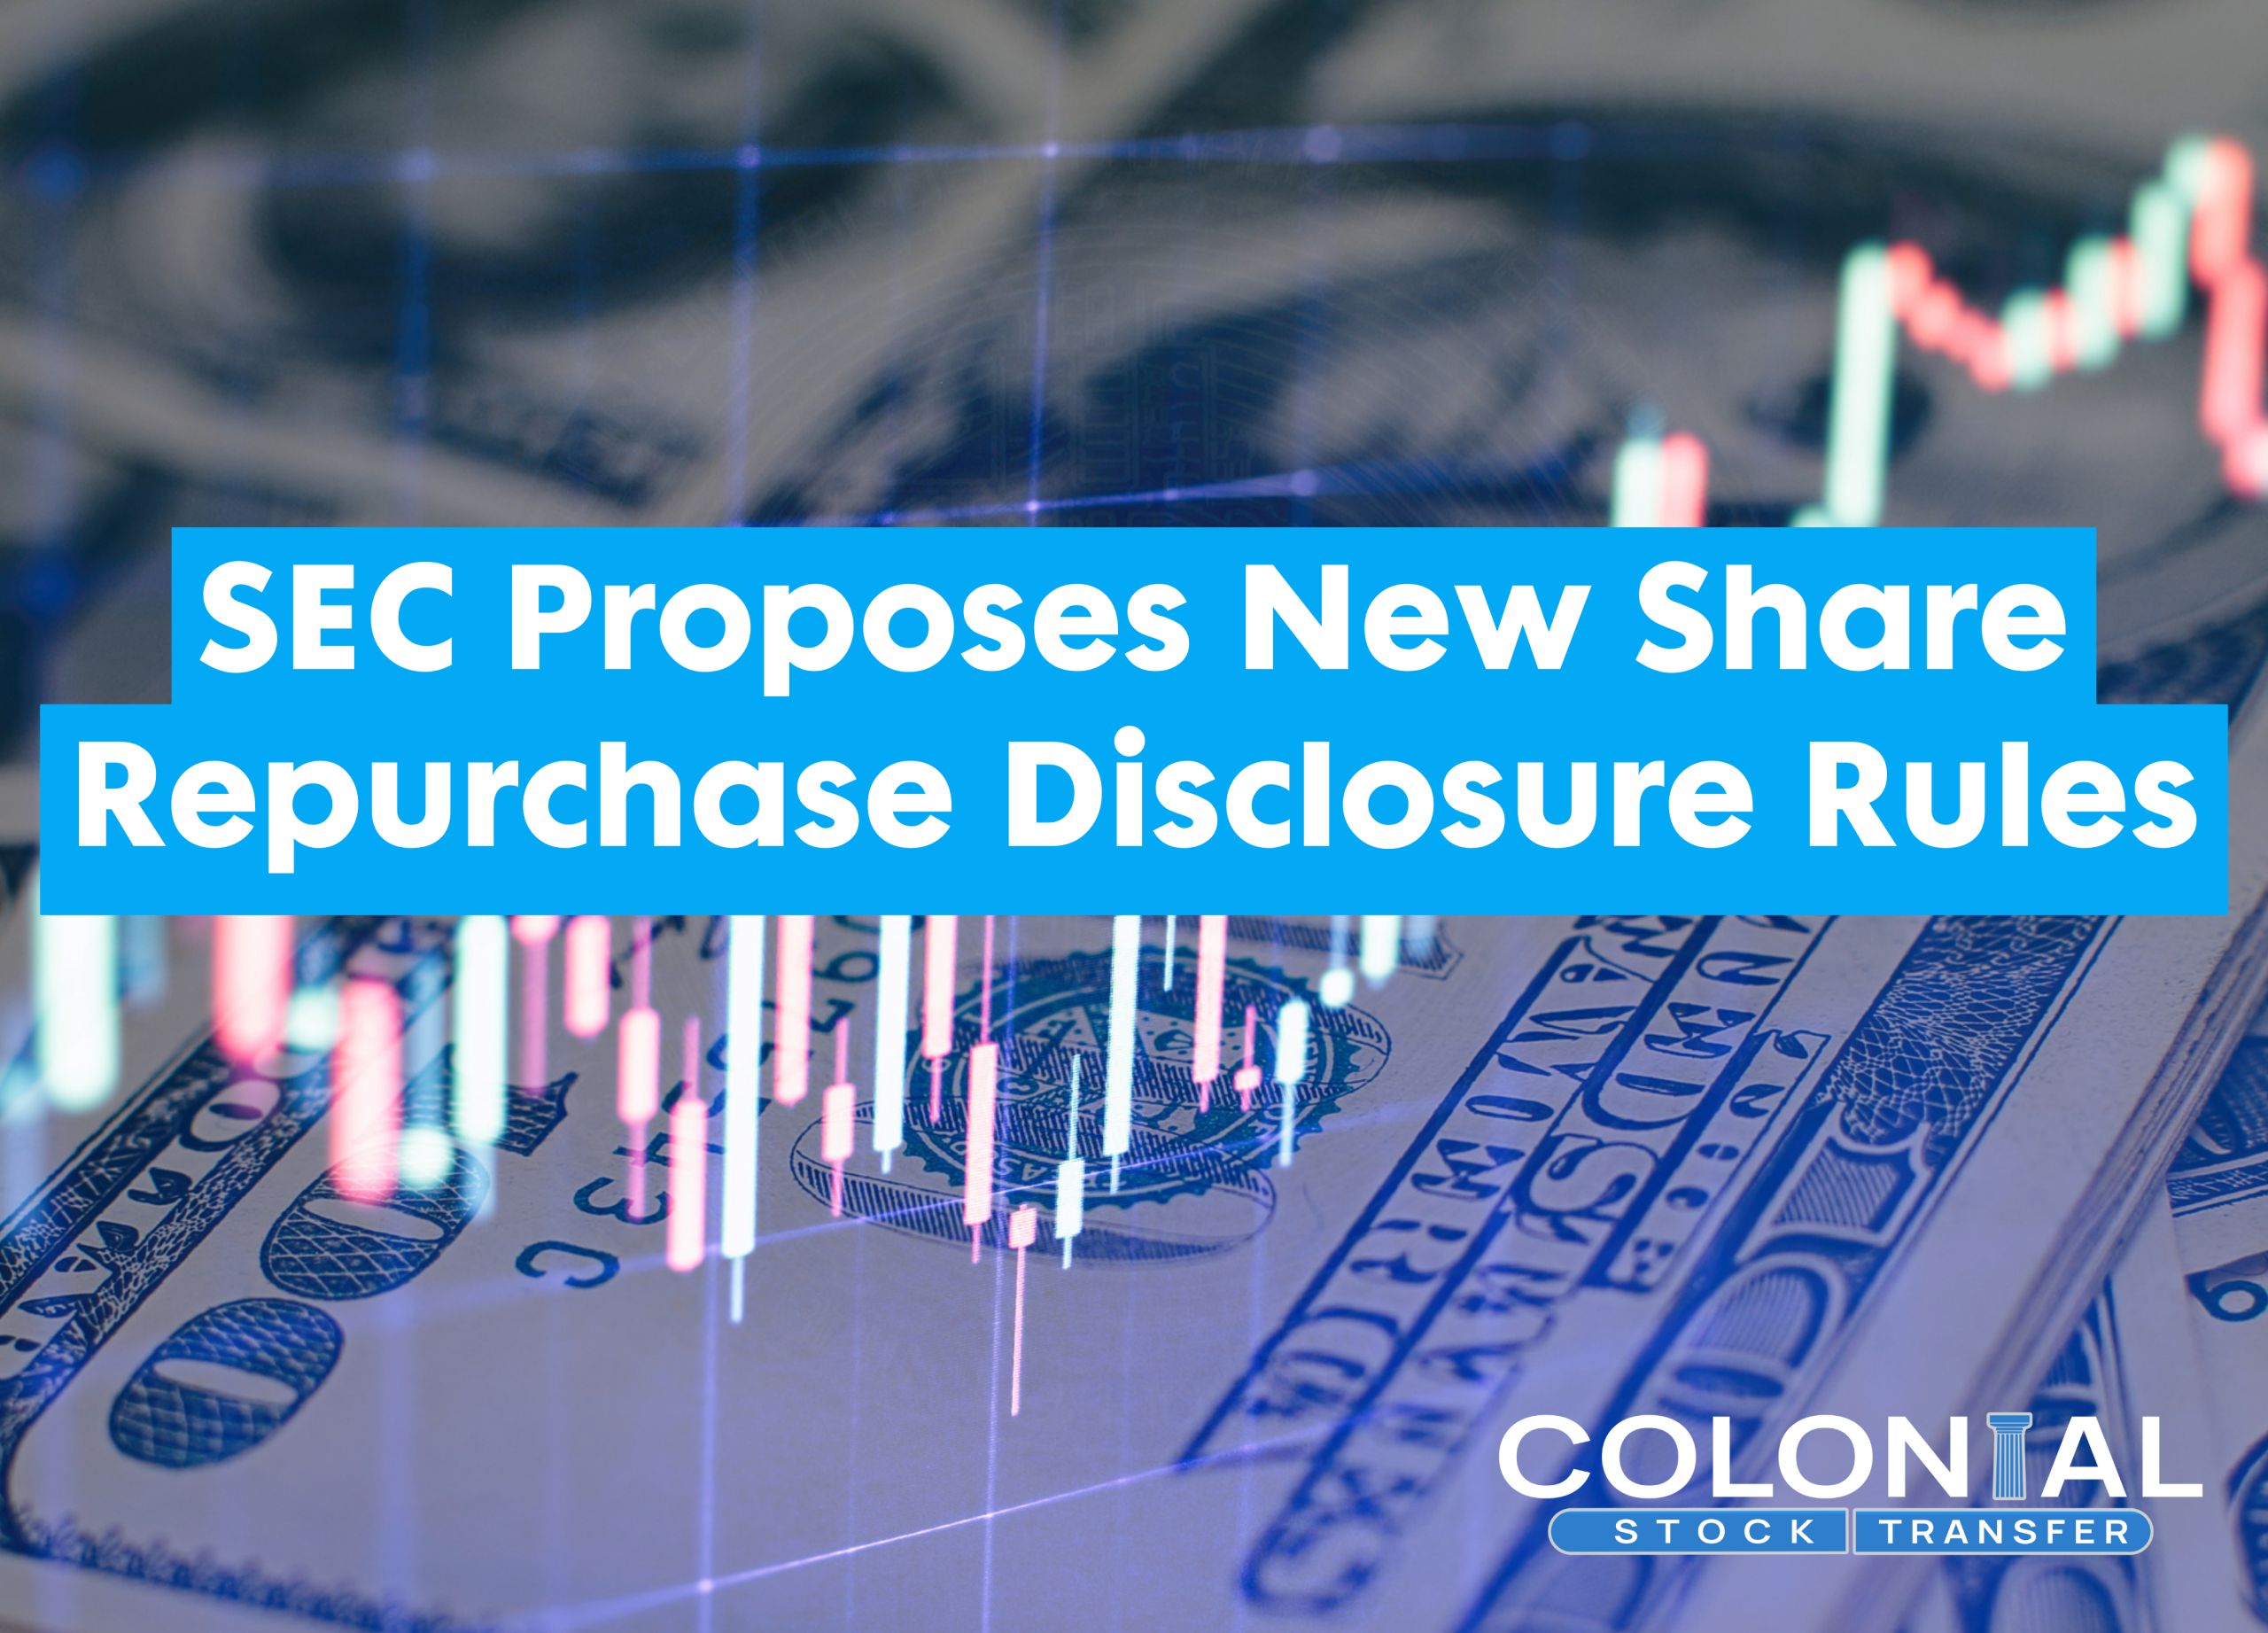 SEC Proposes New Share Repurchase Disclosure Rules